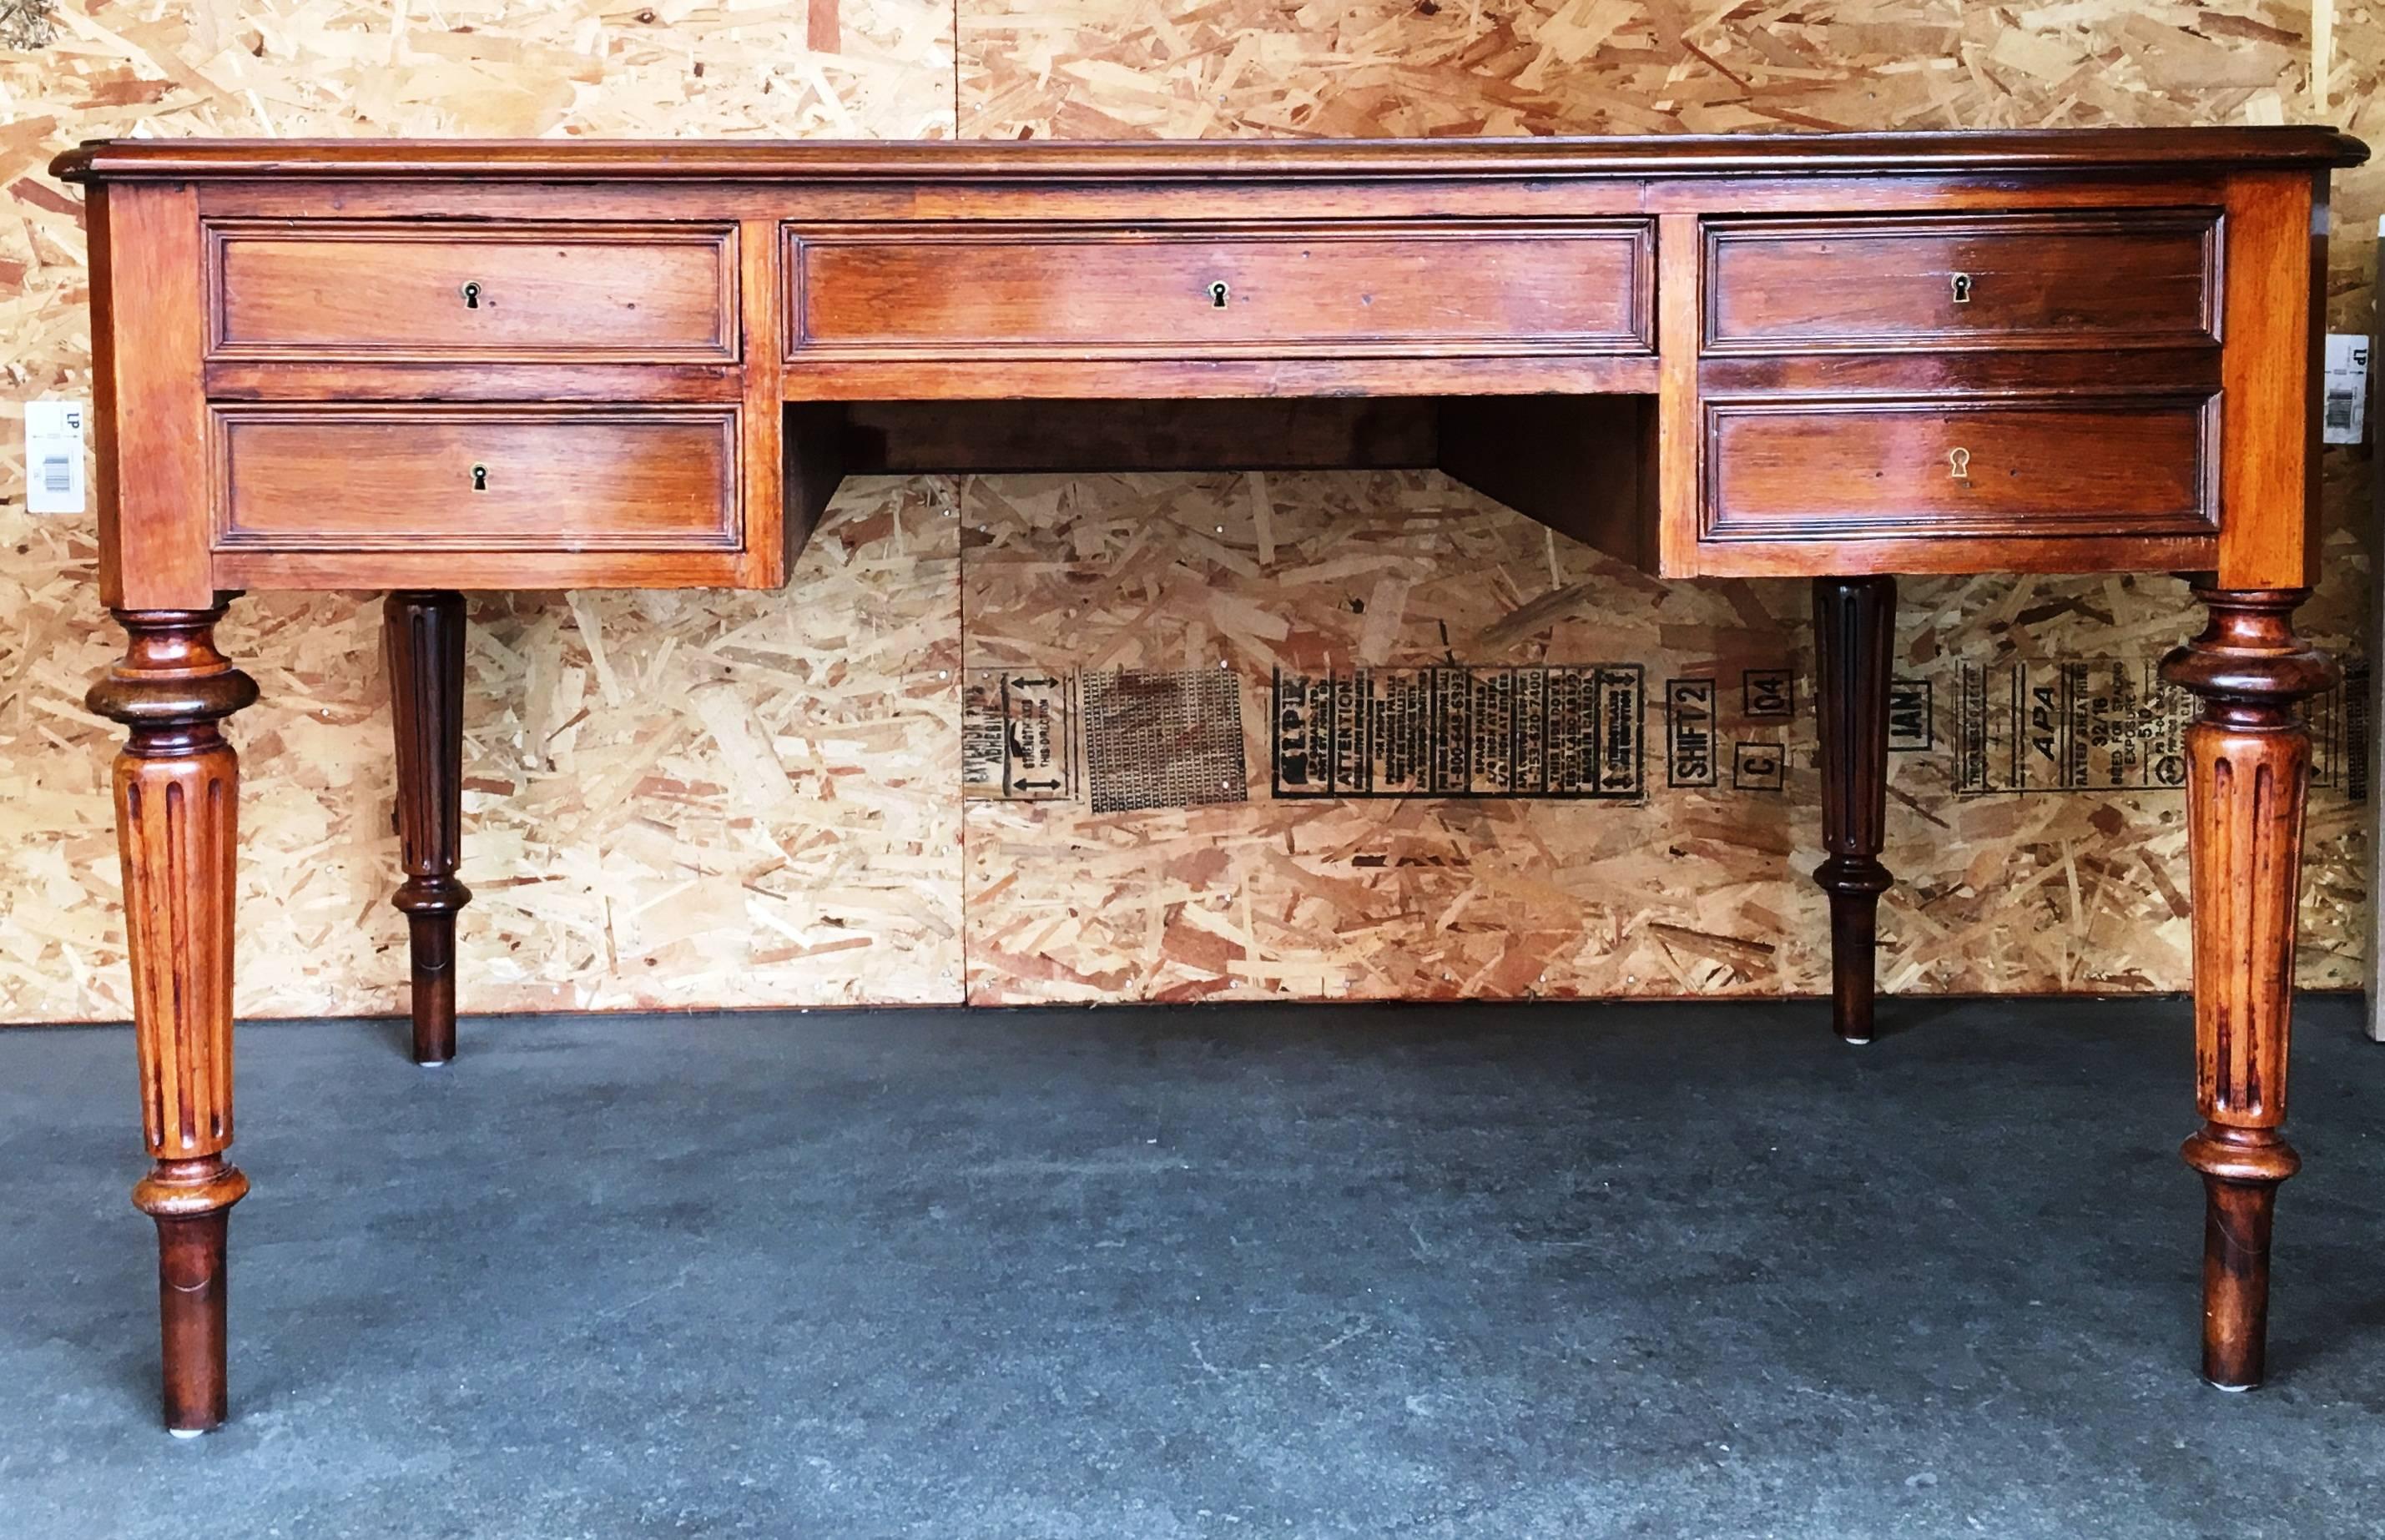 Antique five-drawer desk with a leather top and detailed turned legs. 